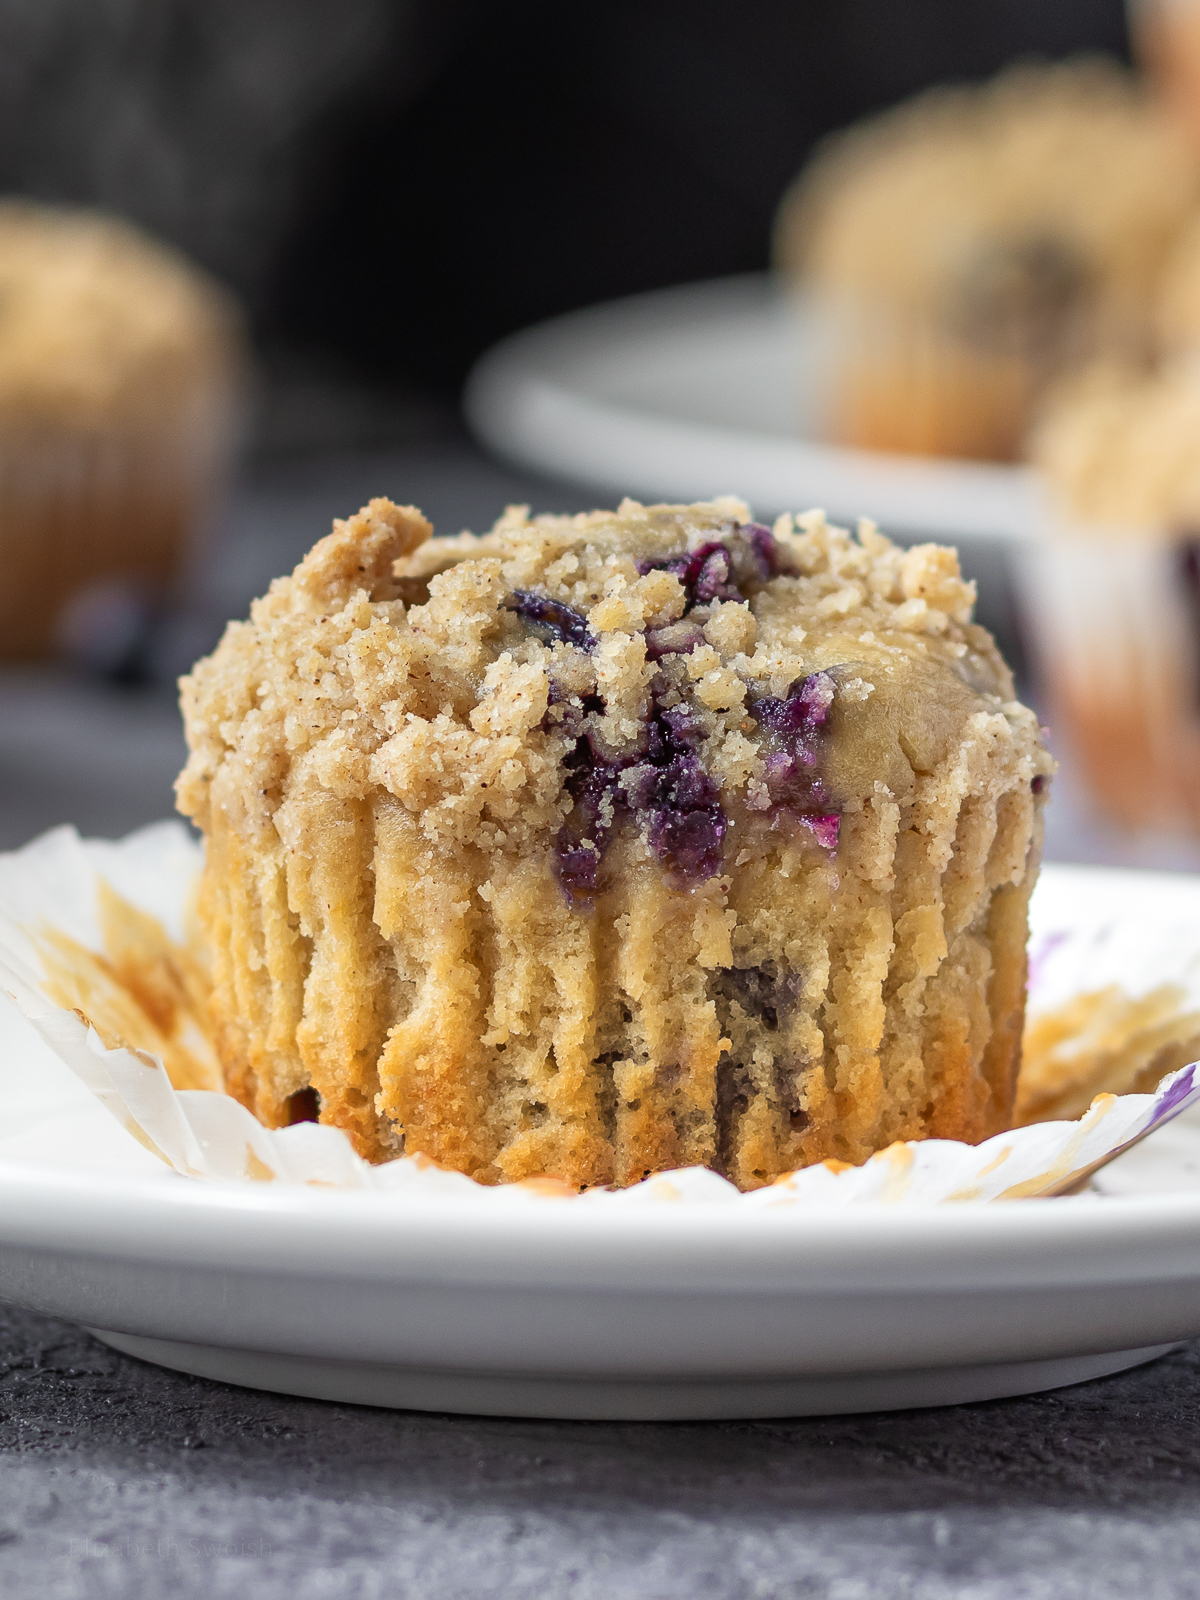 An unwrapped Blueberry Earl Grey Muffin topped with streusel.